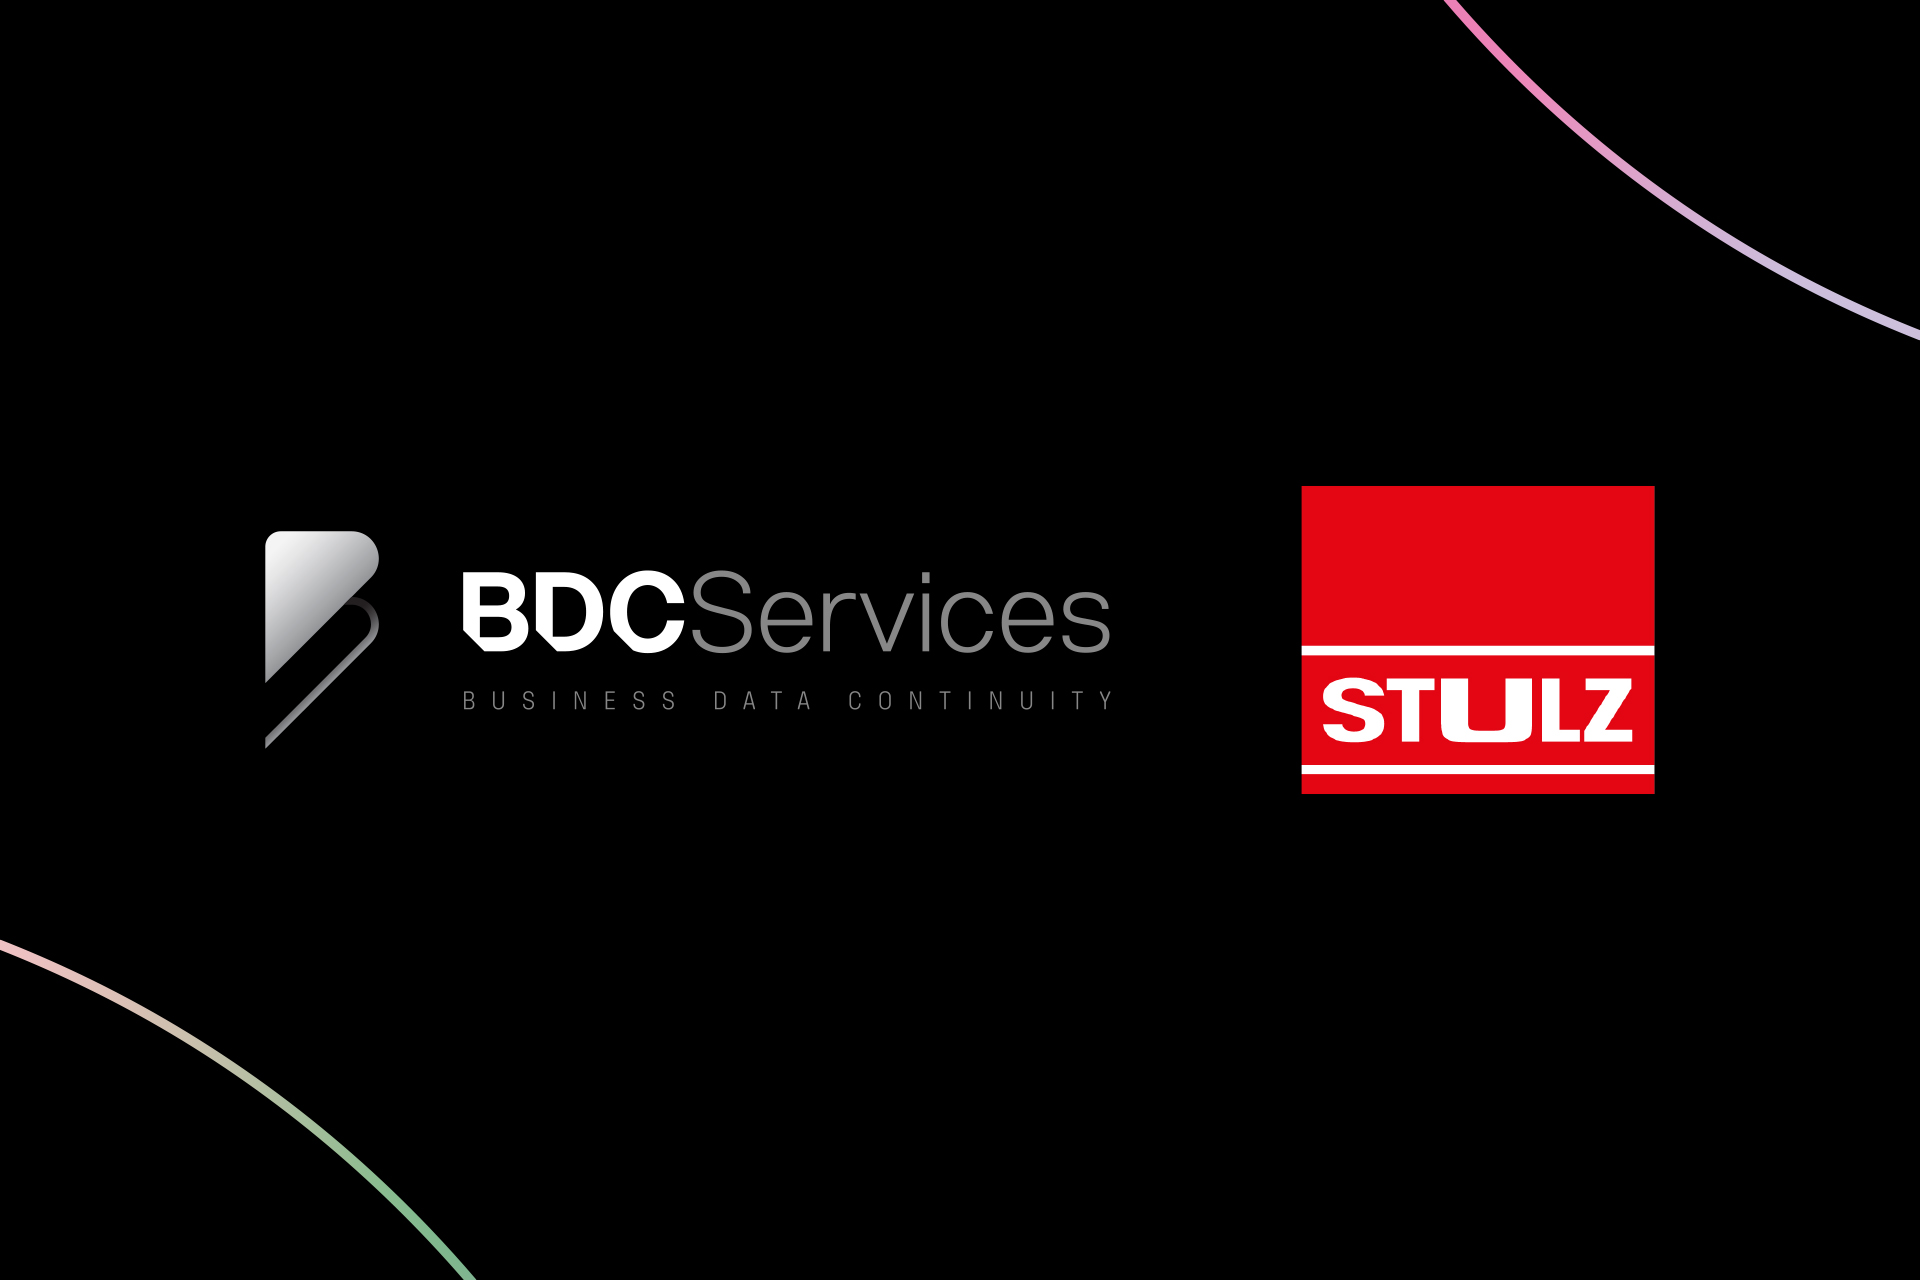 BDC SERVICES AND STULZ OCEANIA JOIN FORCES